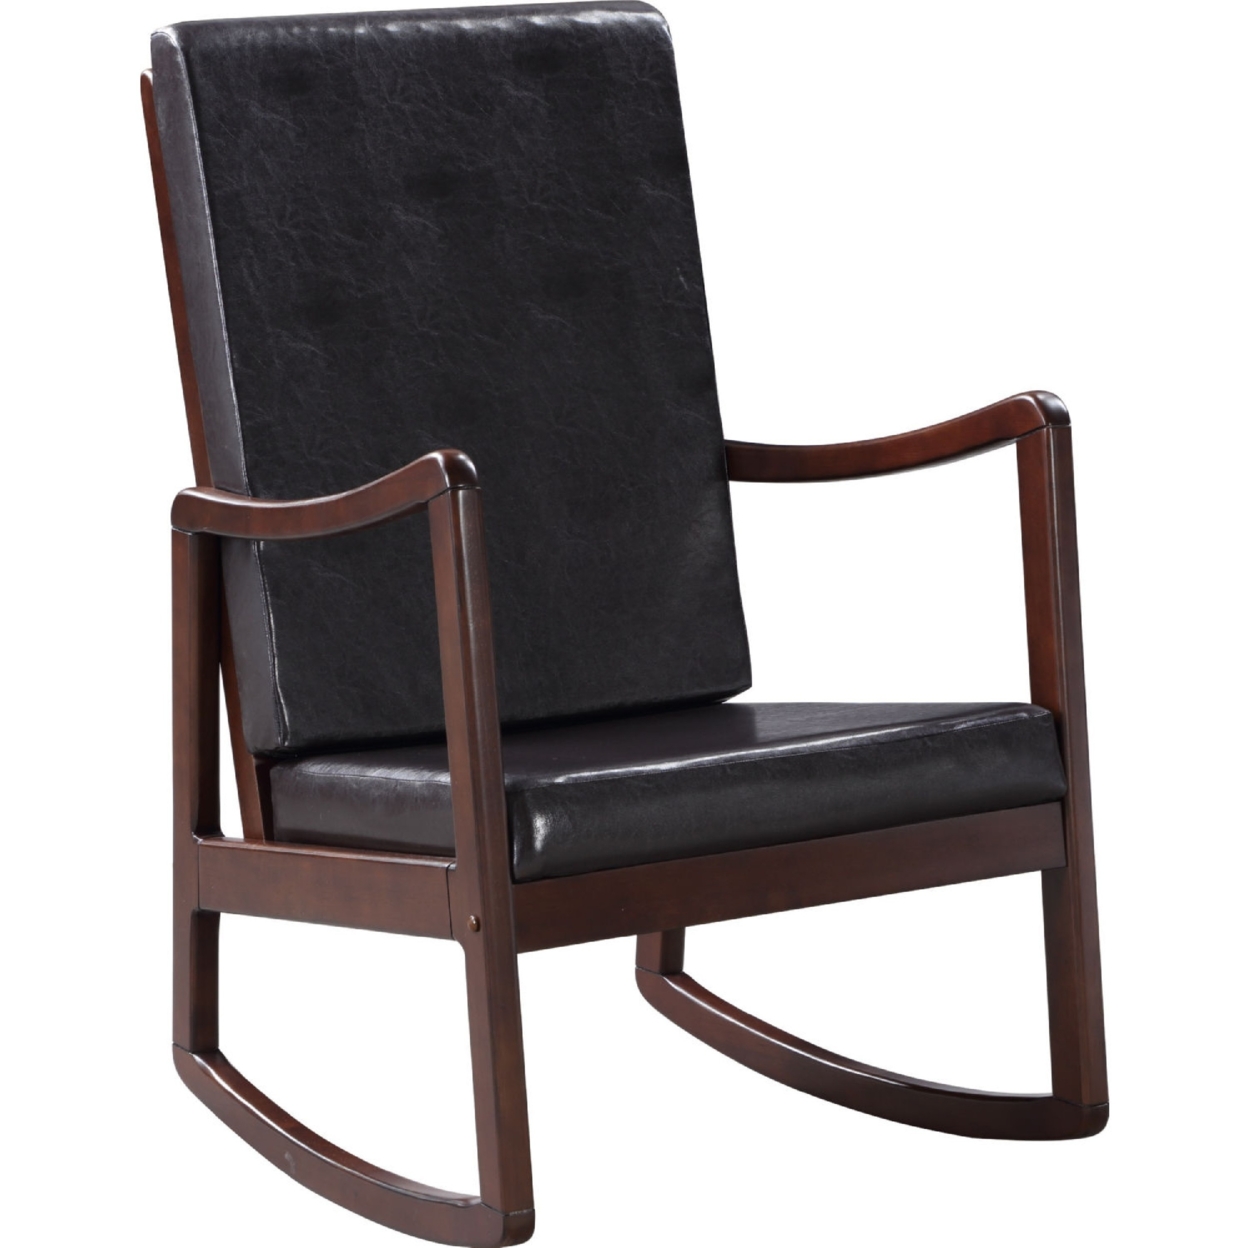 Rocking Chair With Leatherette Seating And Wooden Frame, Black- Saltoro Sherpi